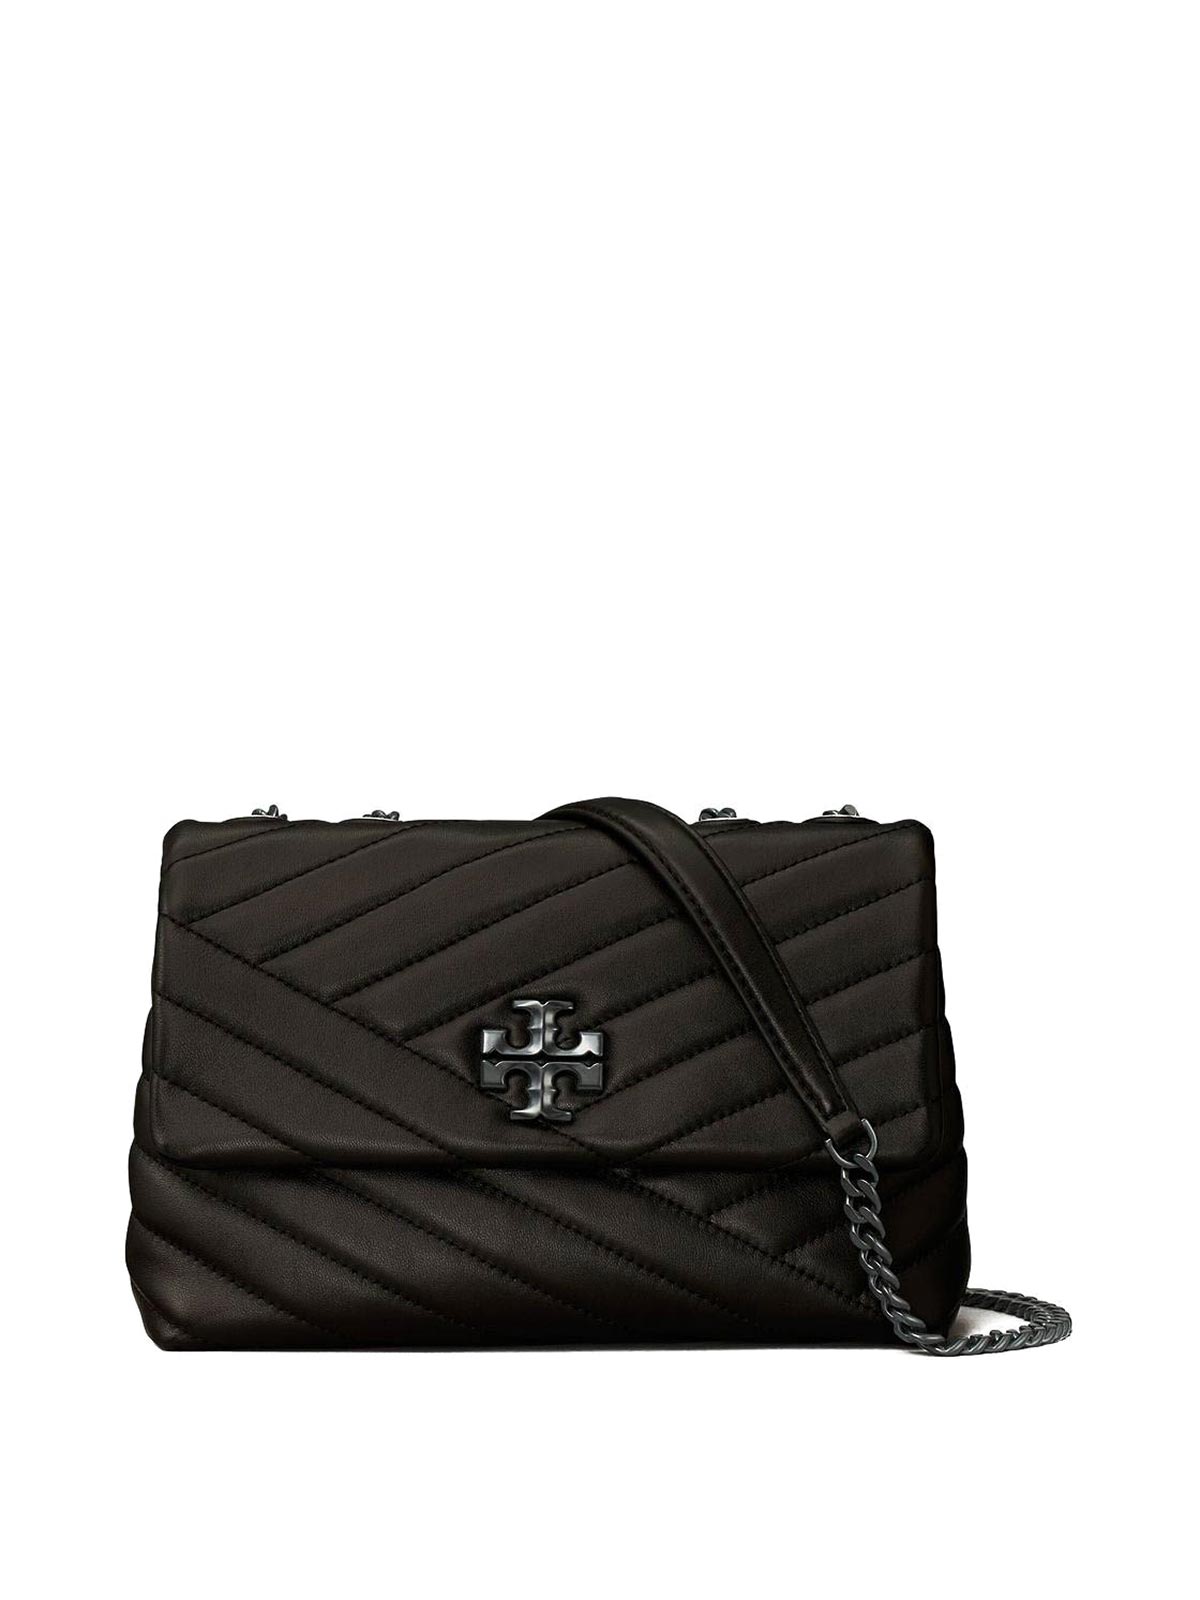 Tory Burch Kira Small Leather Shoulder Bag In Negro